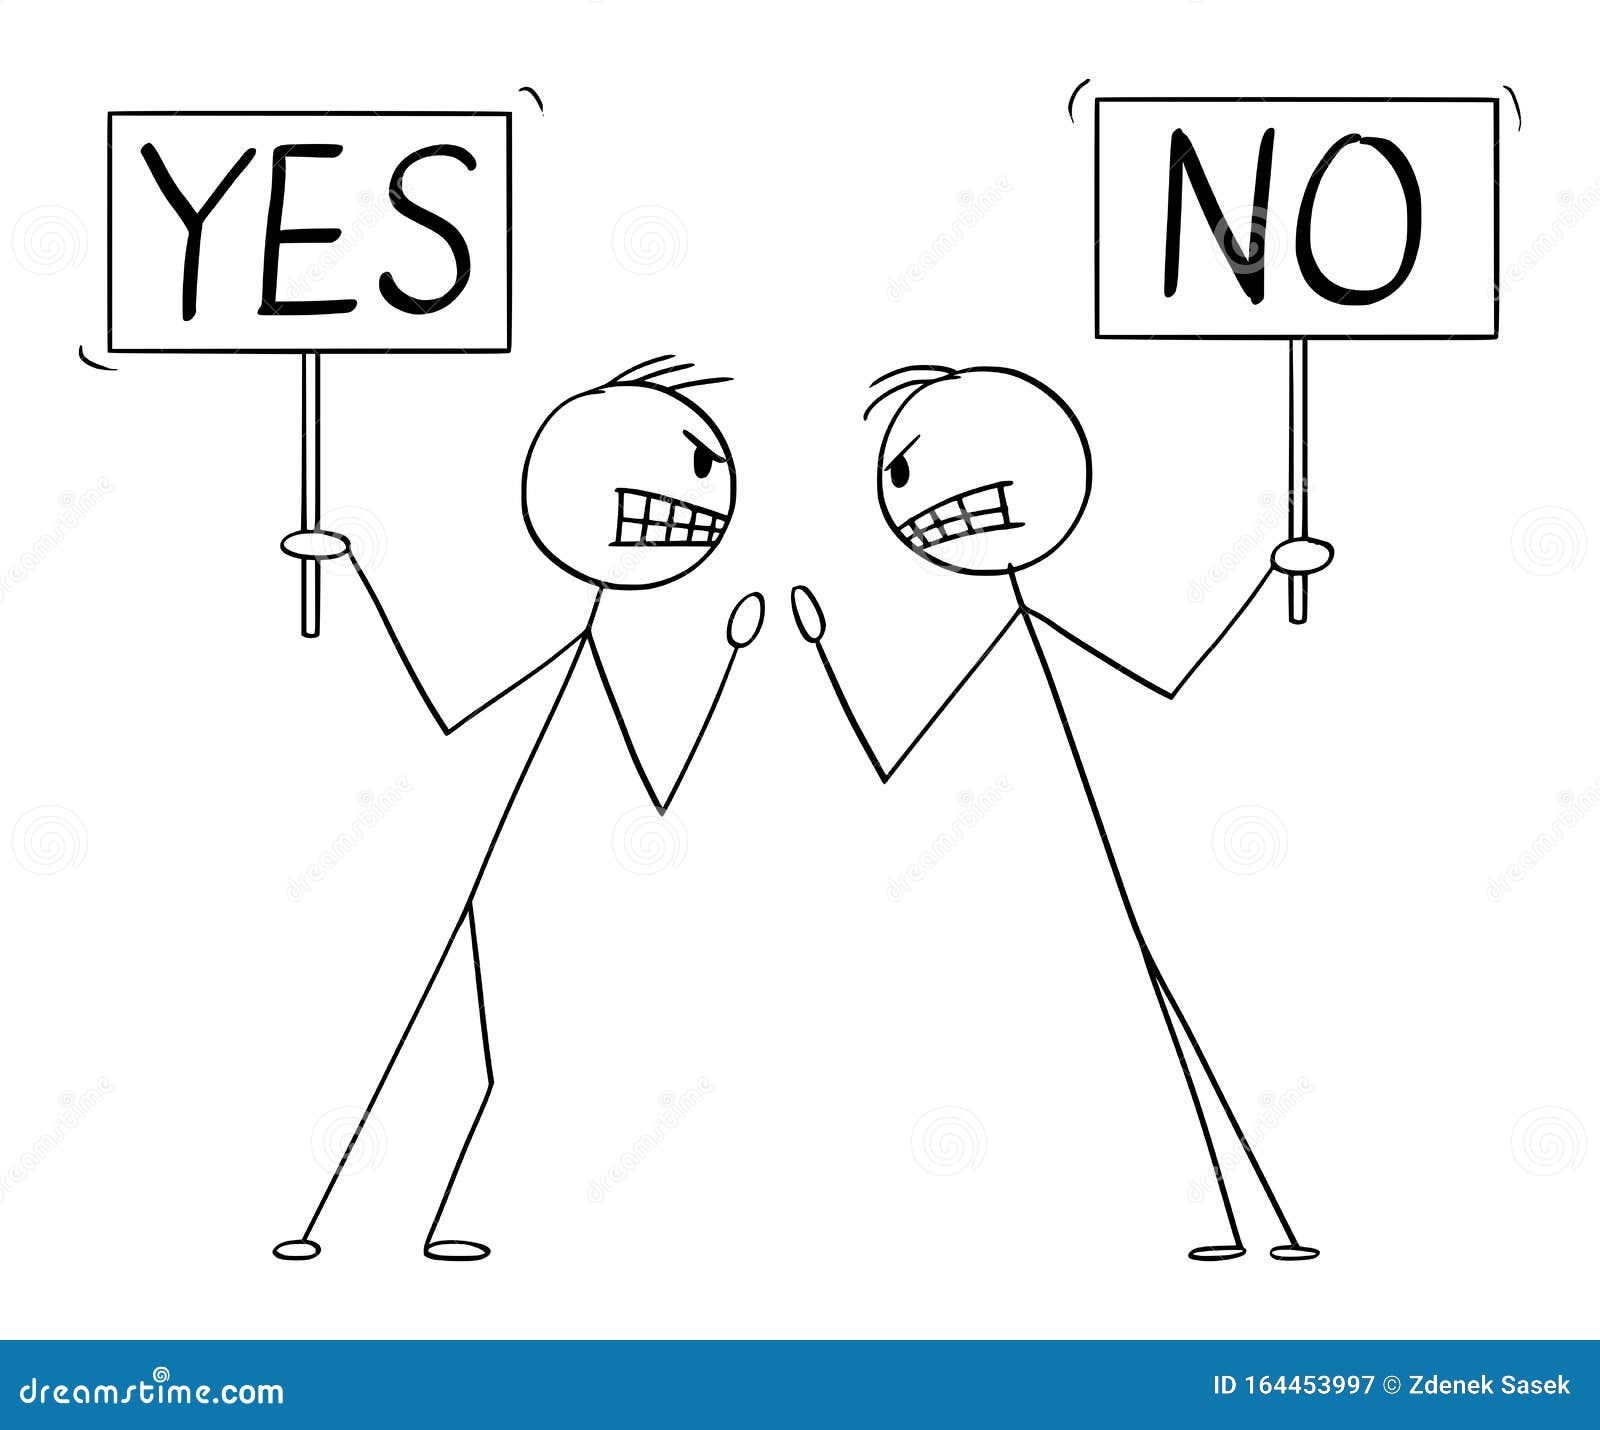  cartoon  of two angry men or businessmen in fight arguing or argument with yes and no signs in hands